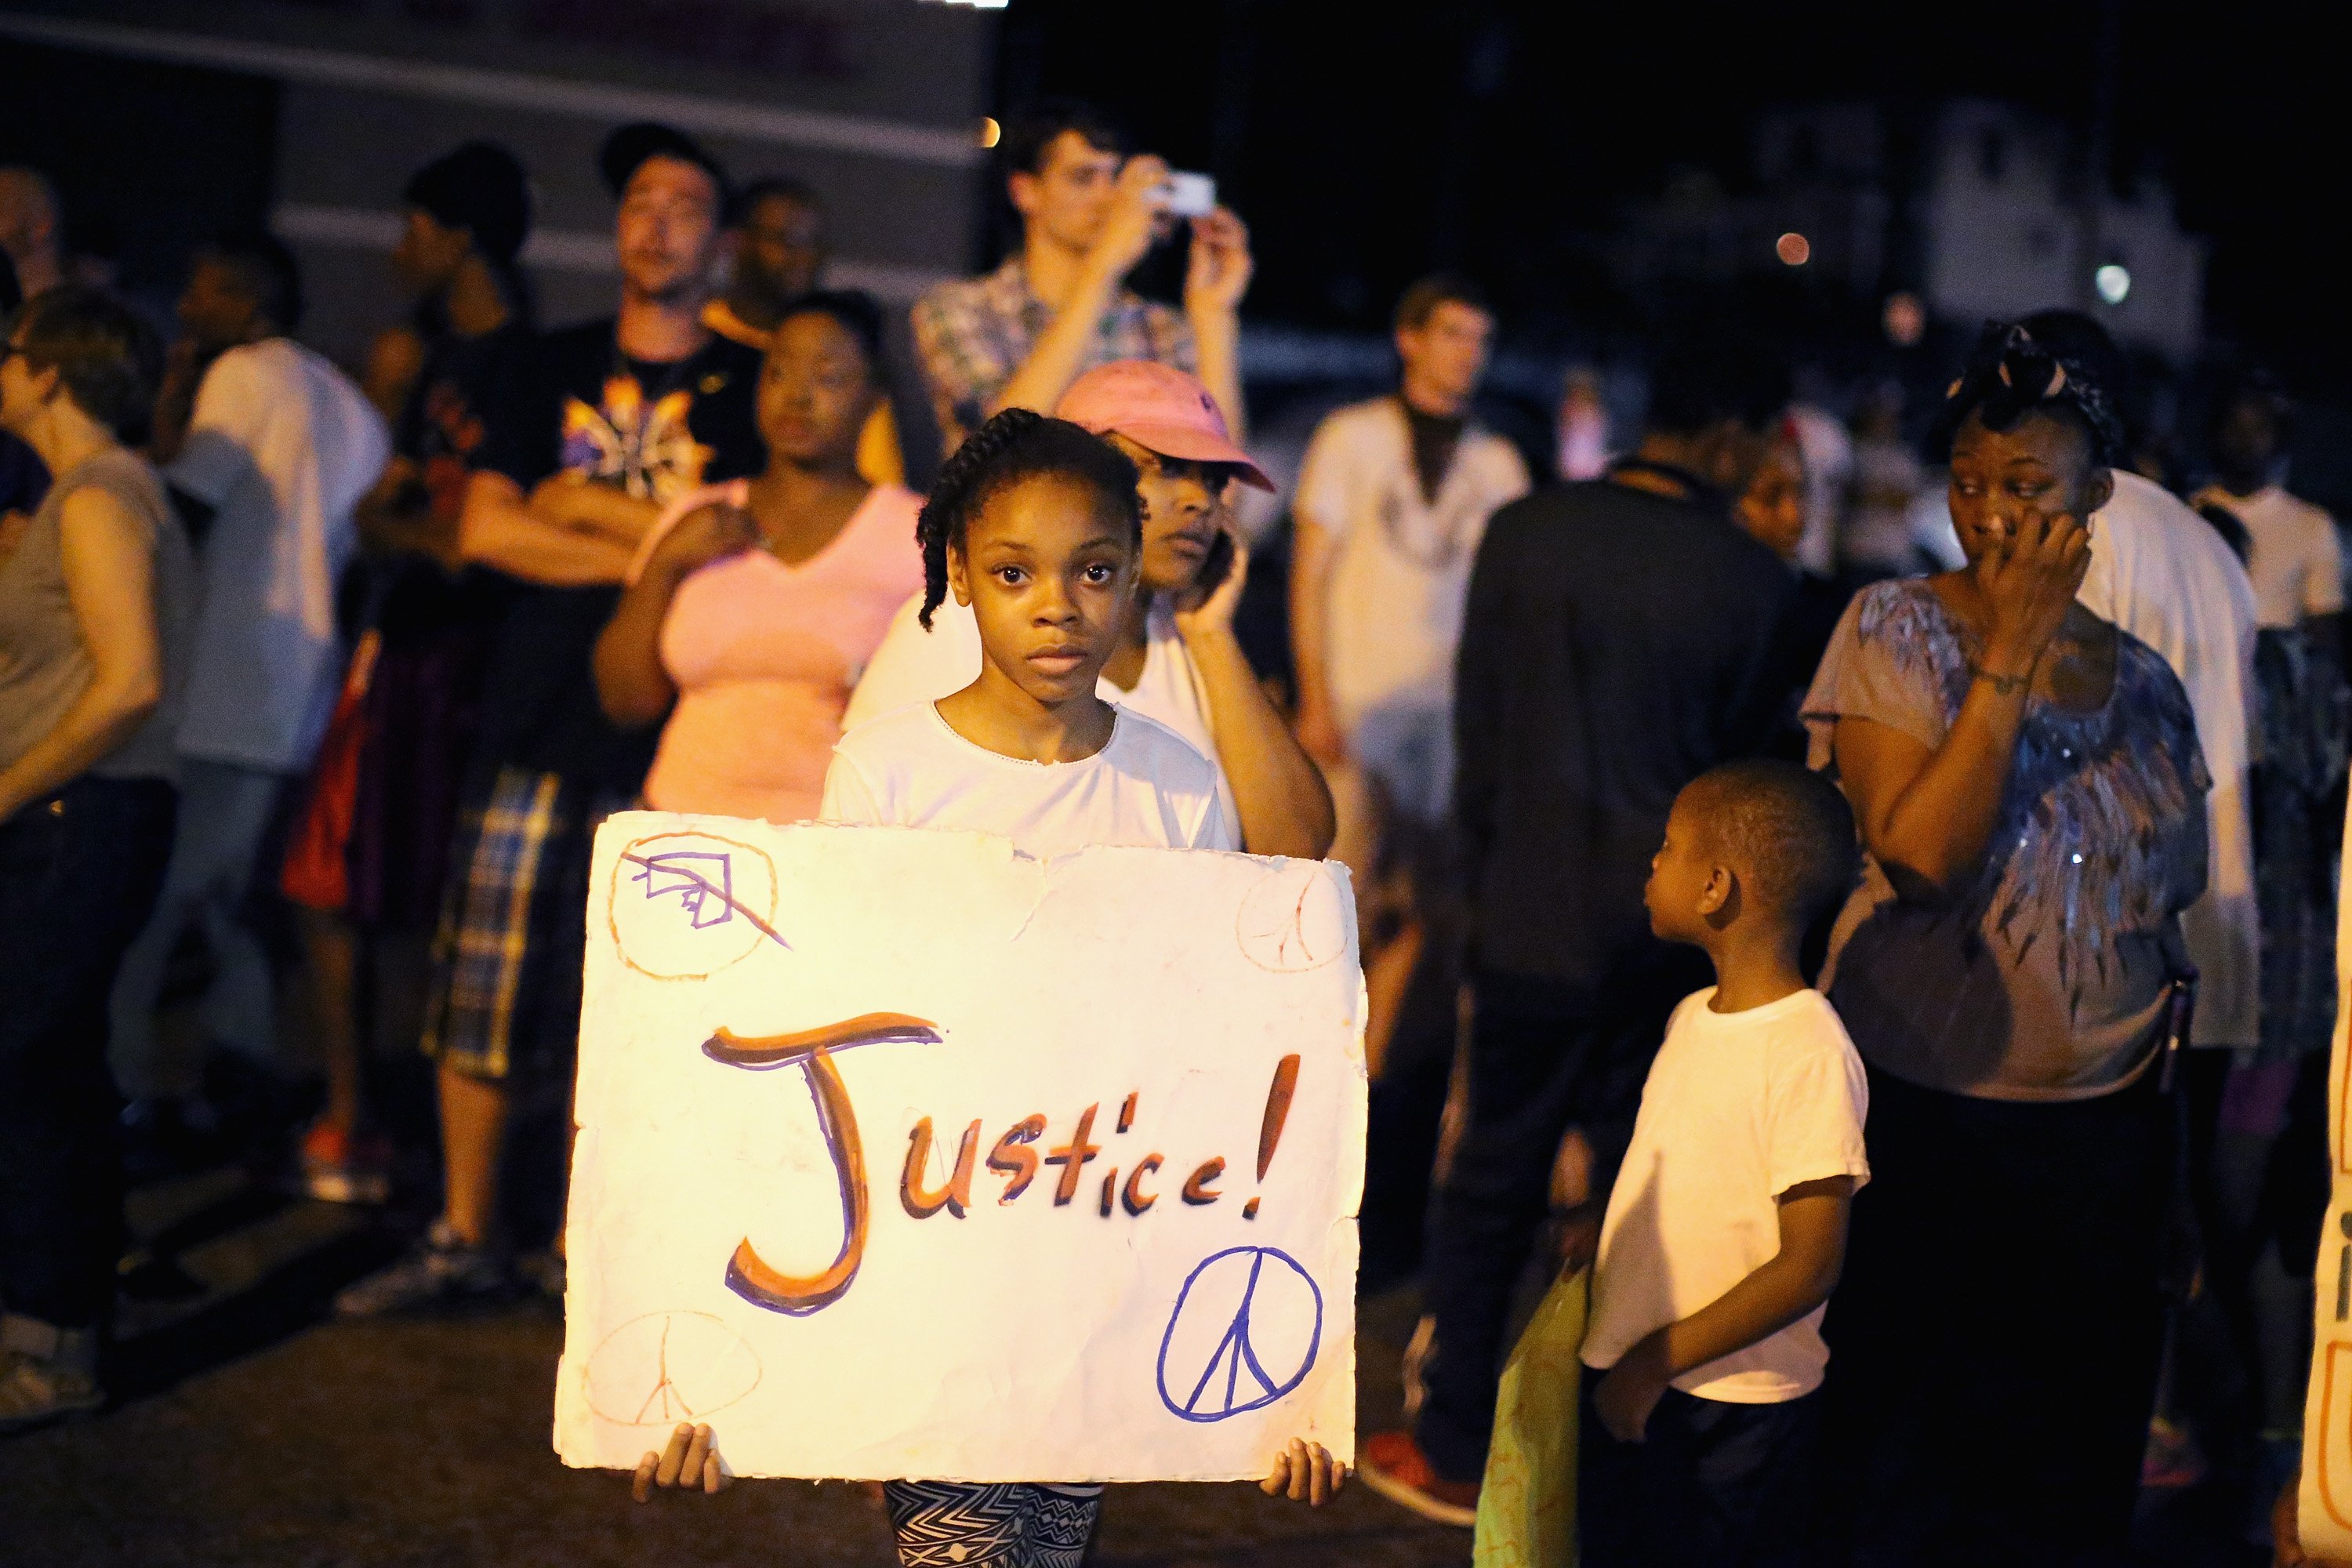 Demonstrators protest the death of Michael Brown on Aug. 22, 2014 in Ferguson, Mo. (Scott Olson—Getty Images)